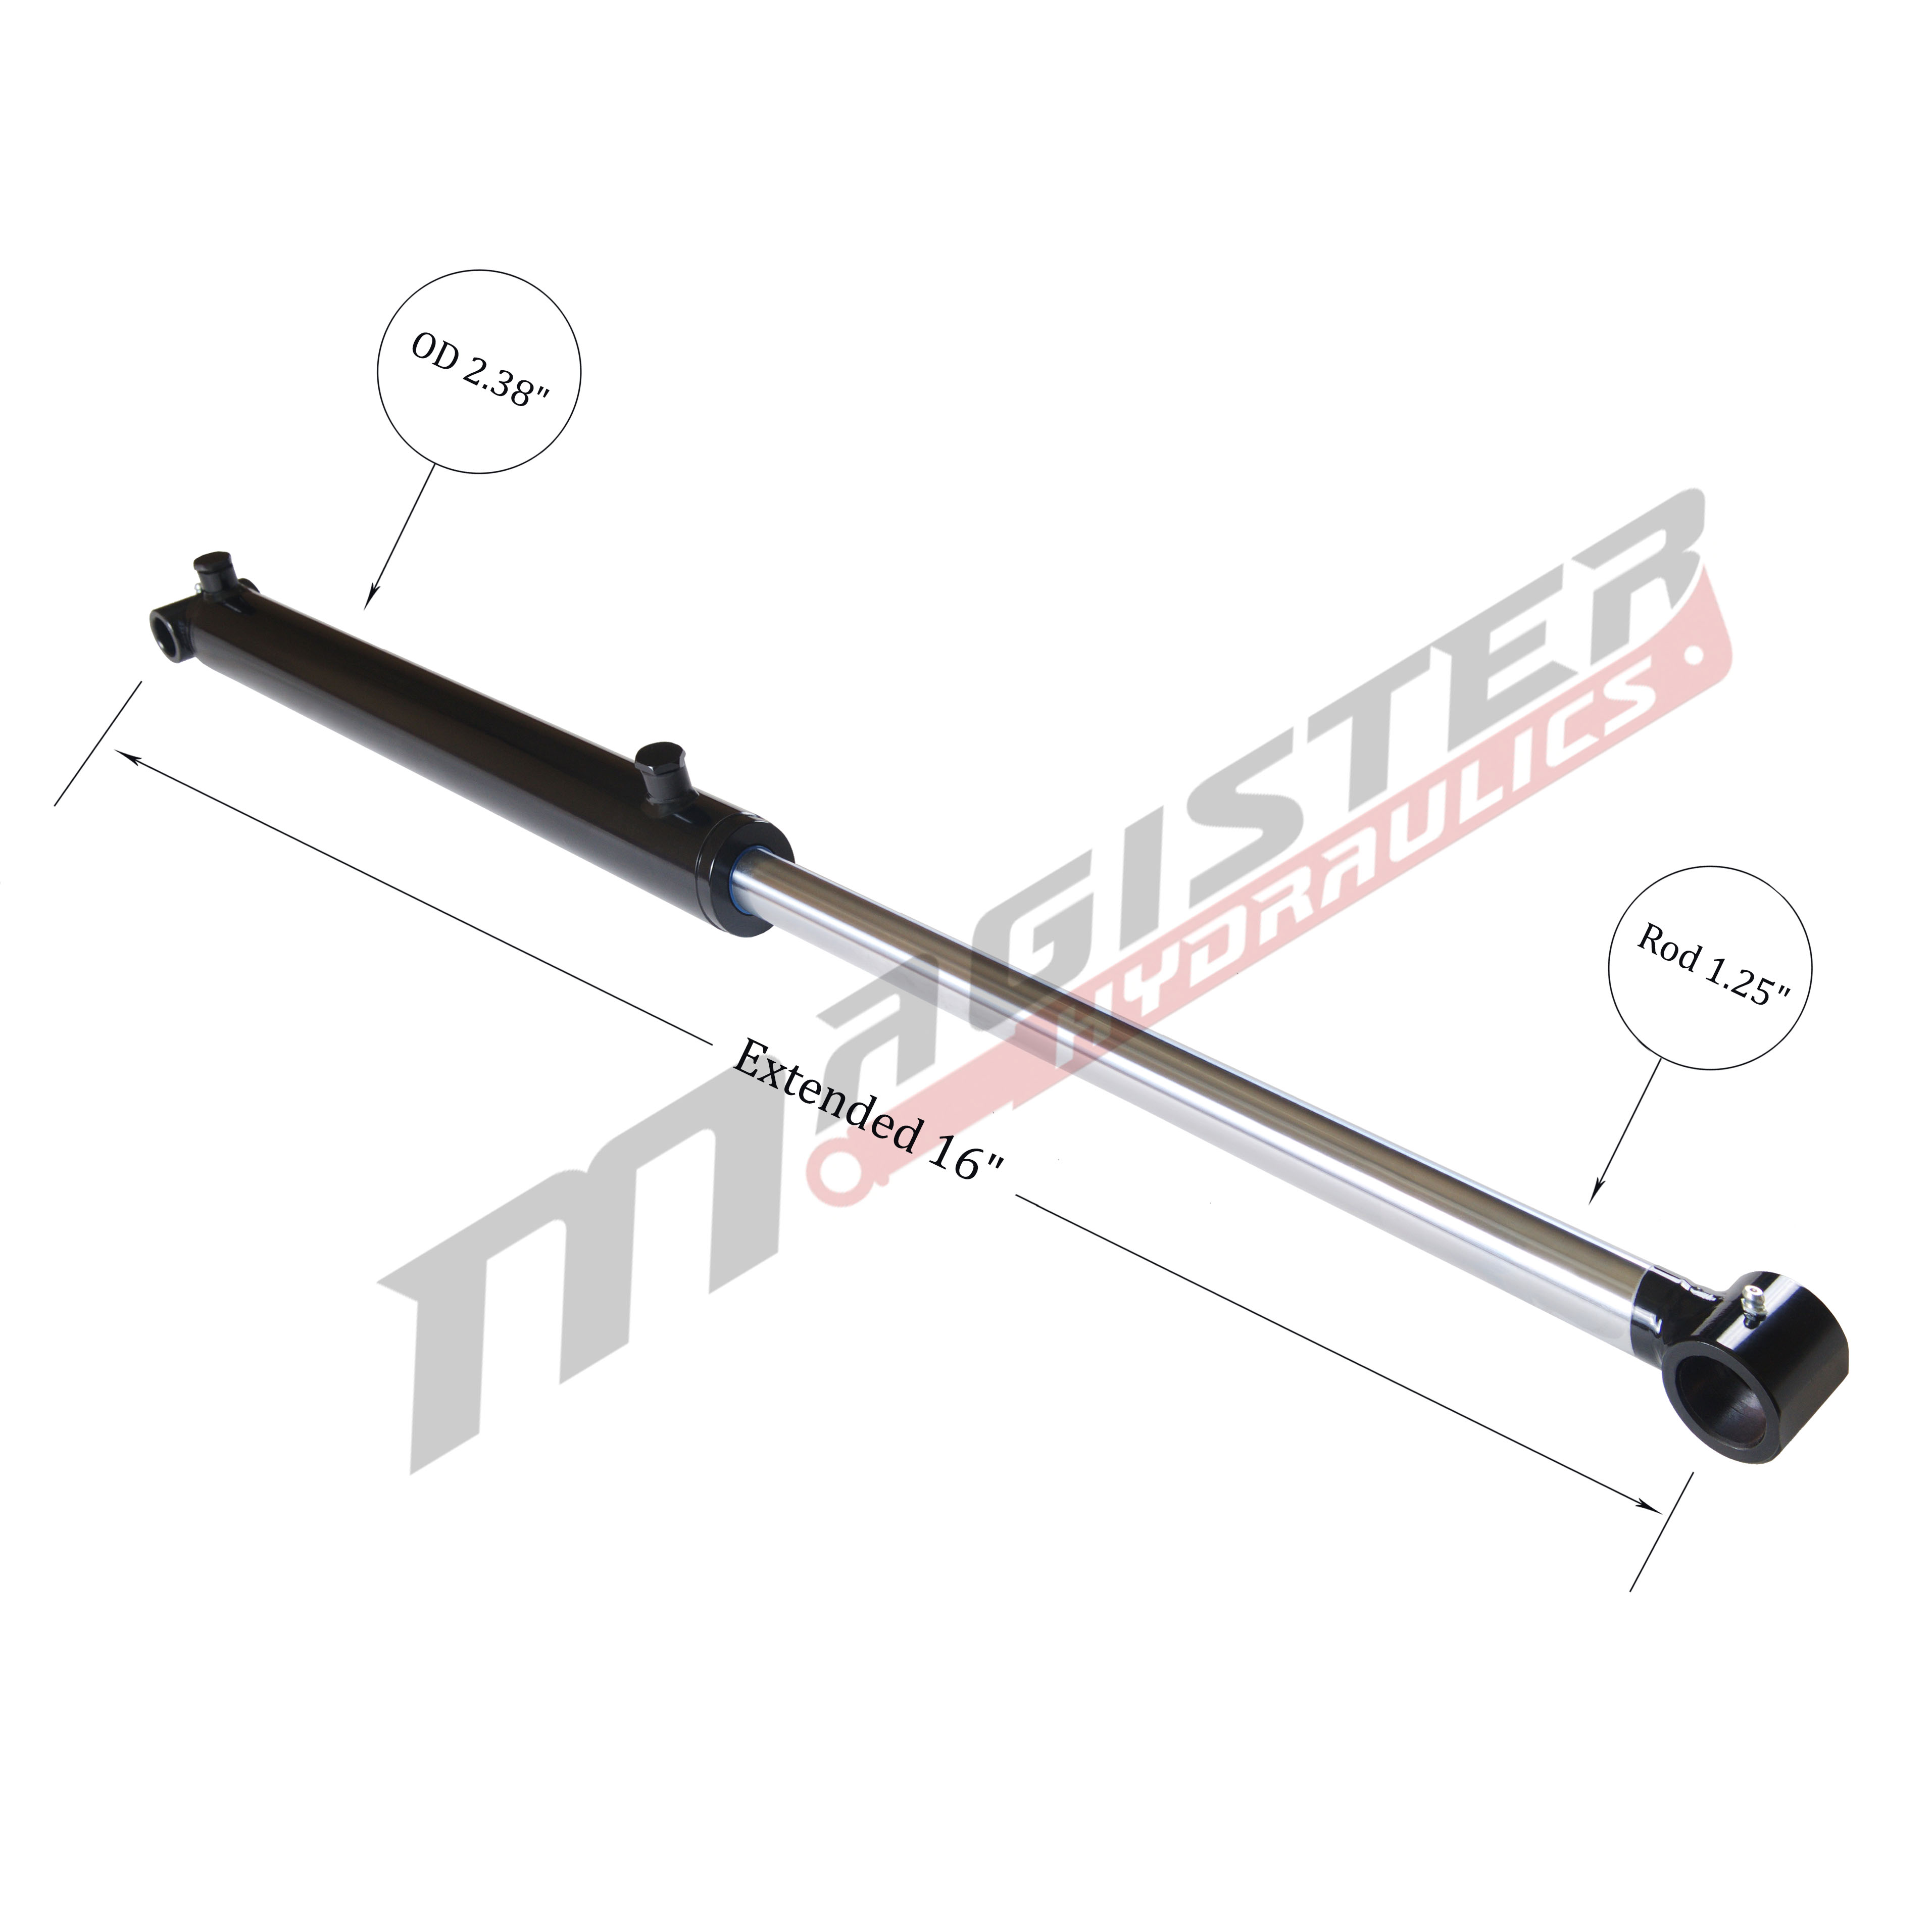 2 bore x 4 stroke hydraulic cylinder, welded cross tube double acting cylinder | Magister Hydraulics